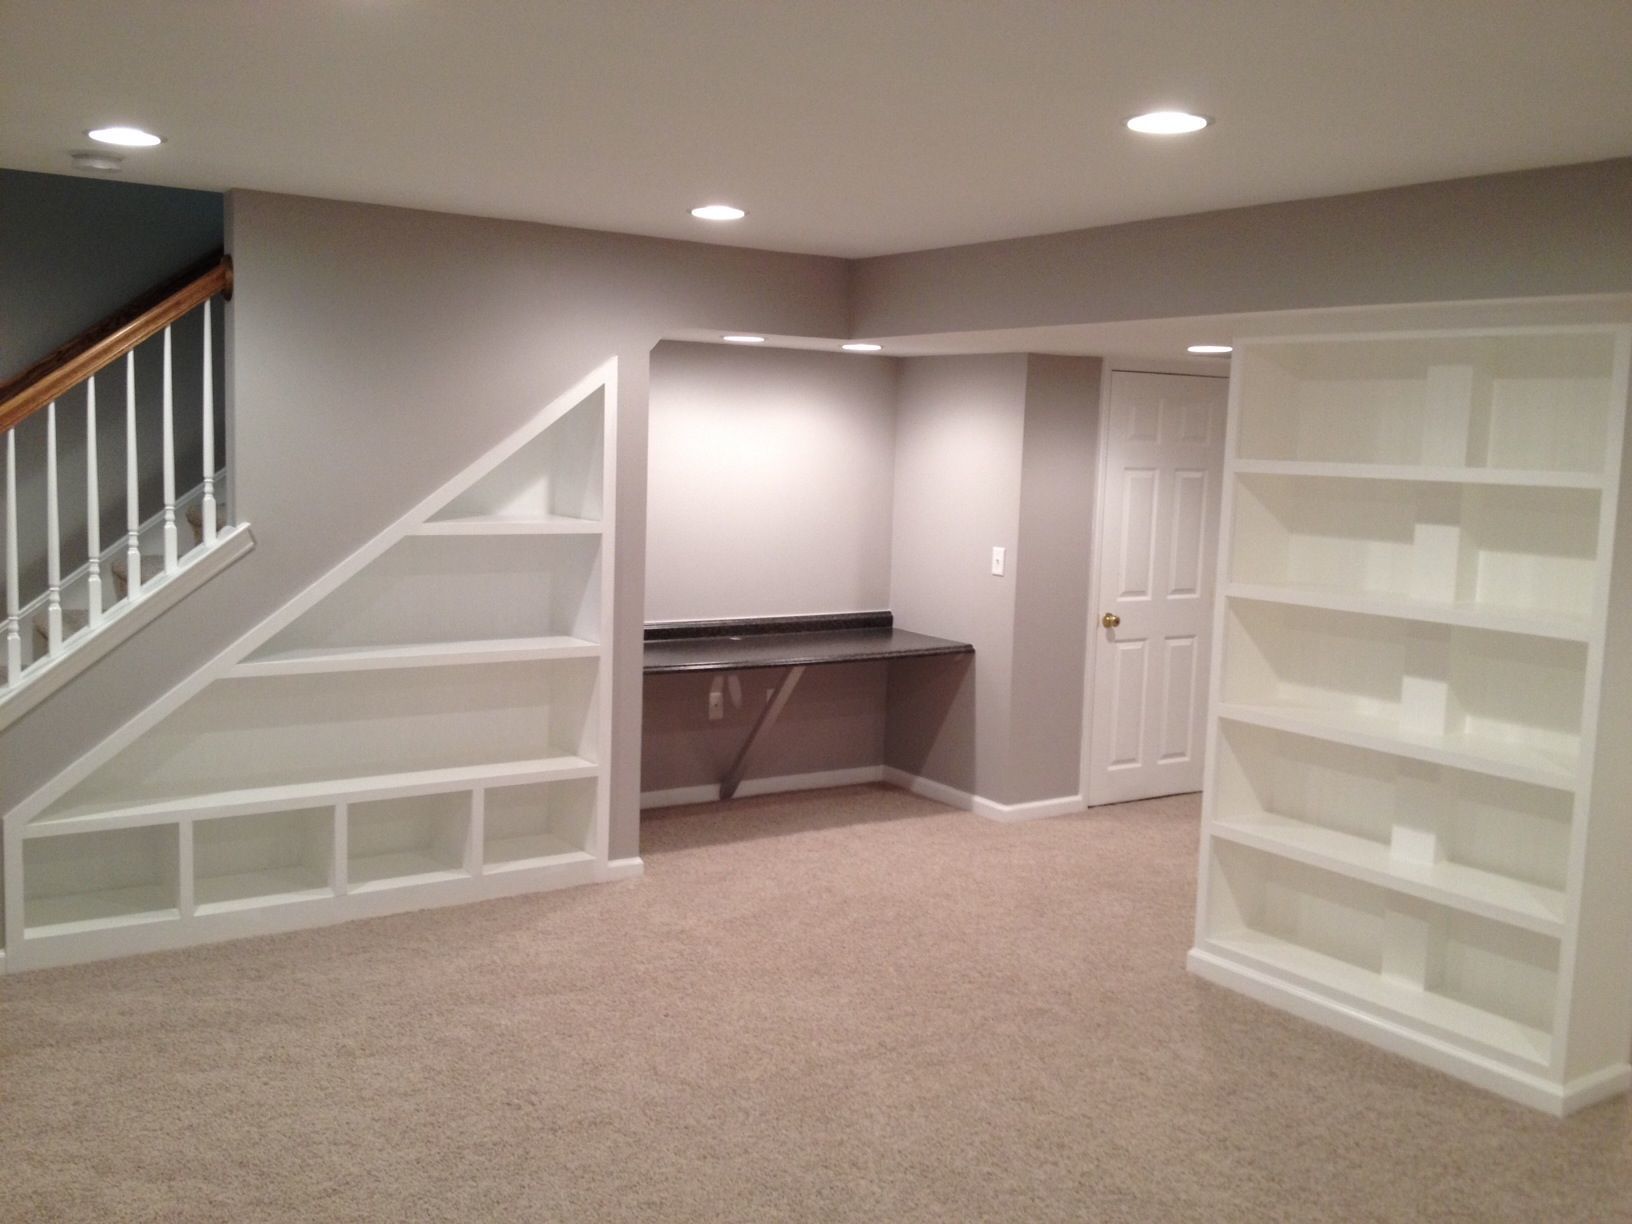 Basement Storage Shelves And Design Ideas Full Of Potential